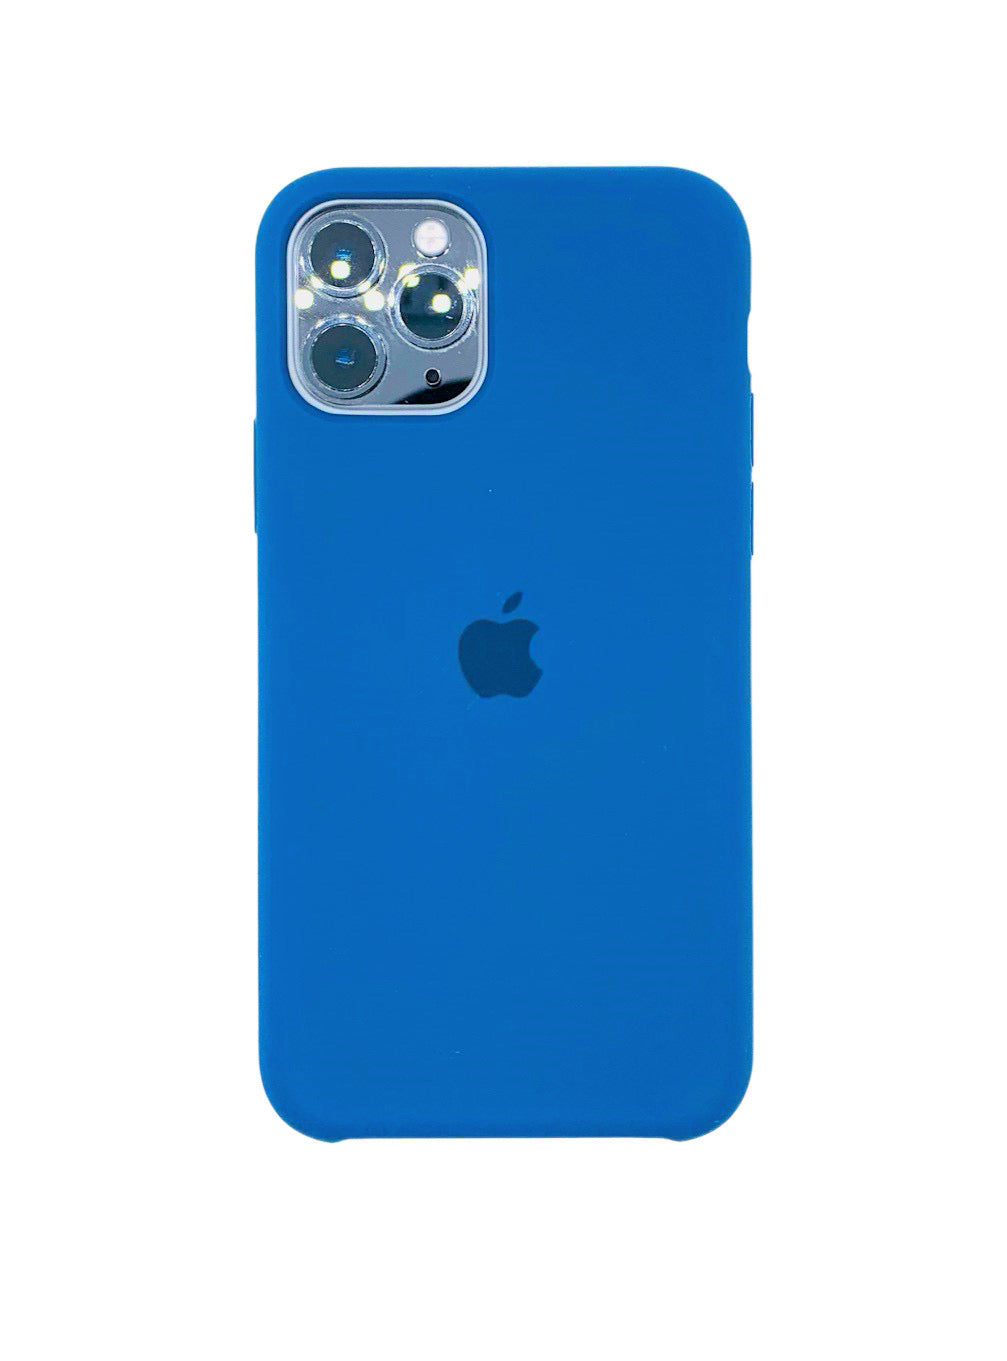 Cover for iPhone 11 blue